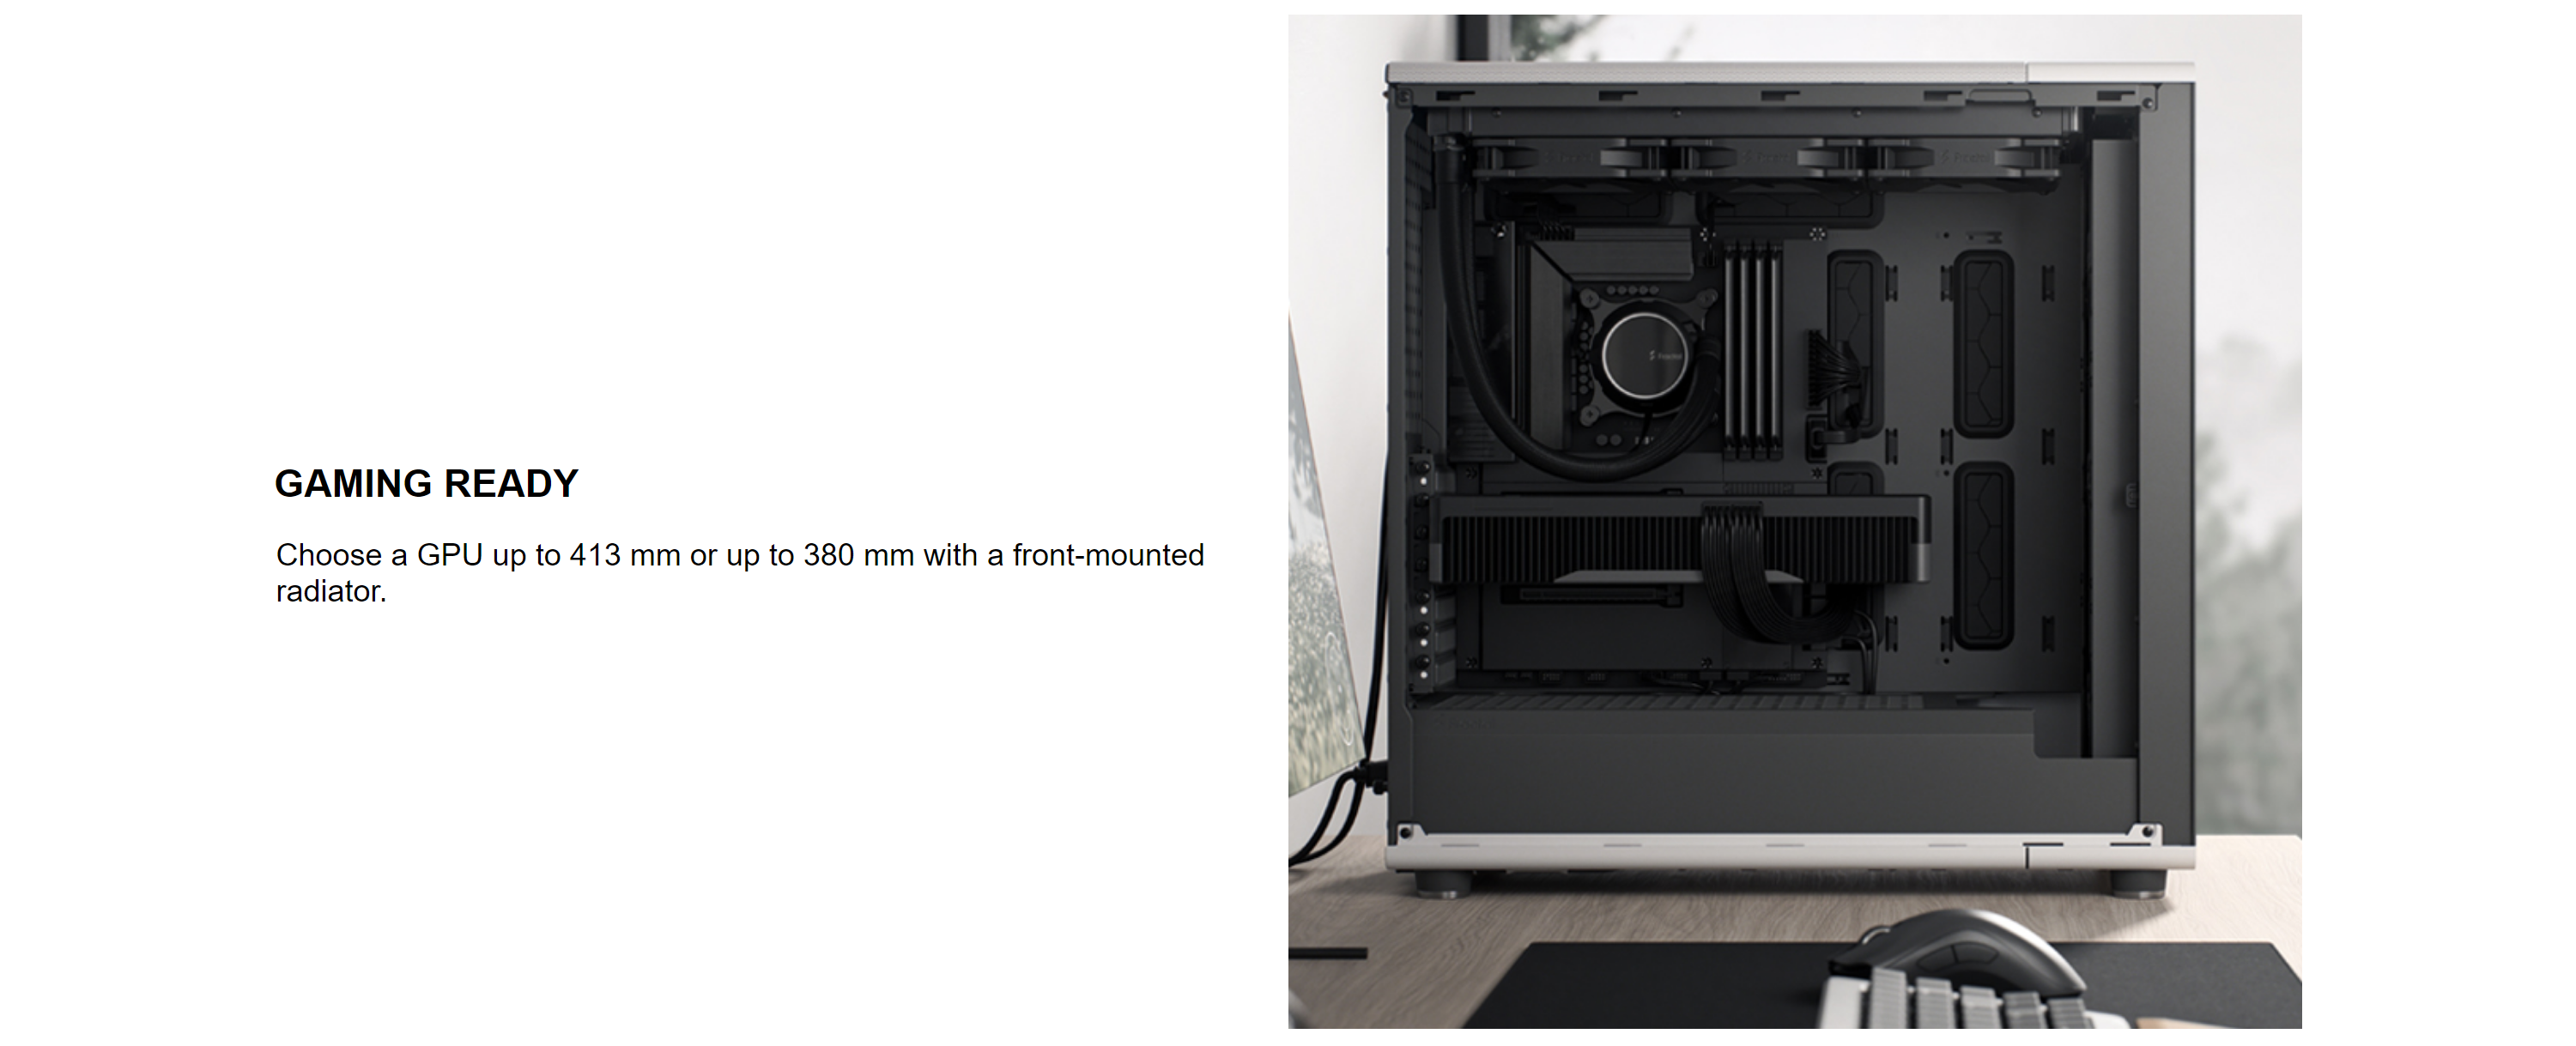 A large marketing image providing additional information about the product Fractal Design North XL Full Tower Case - Chalk White - Additional alt info not provided